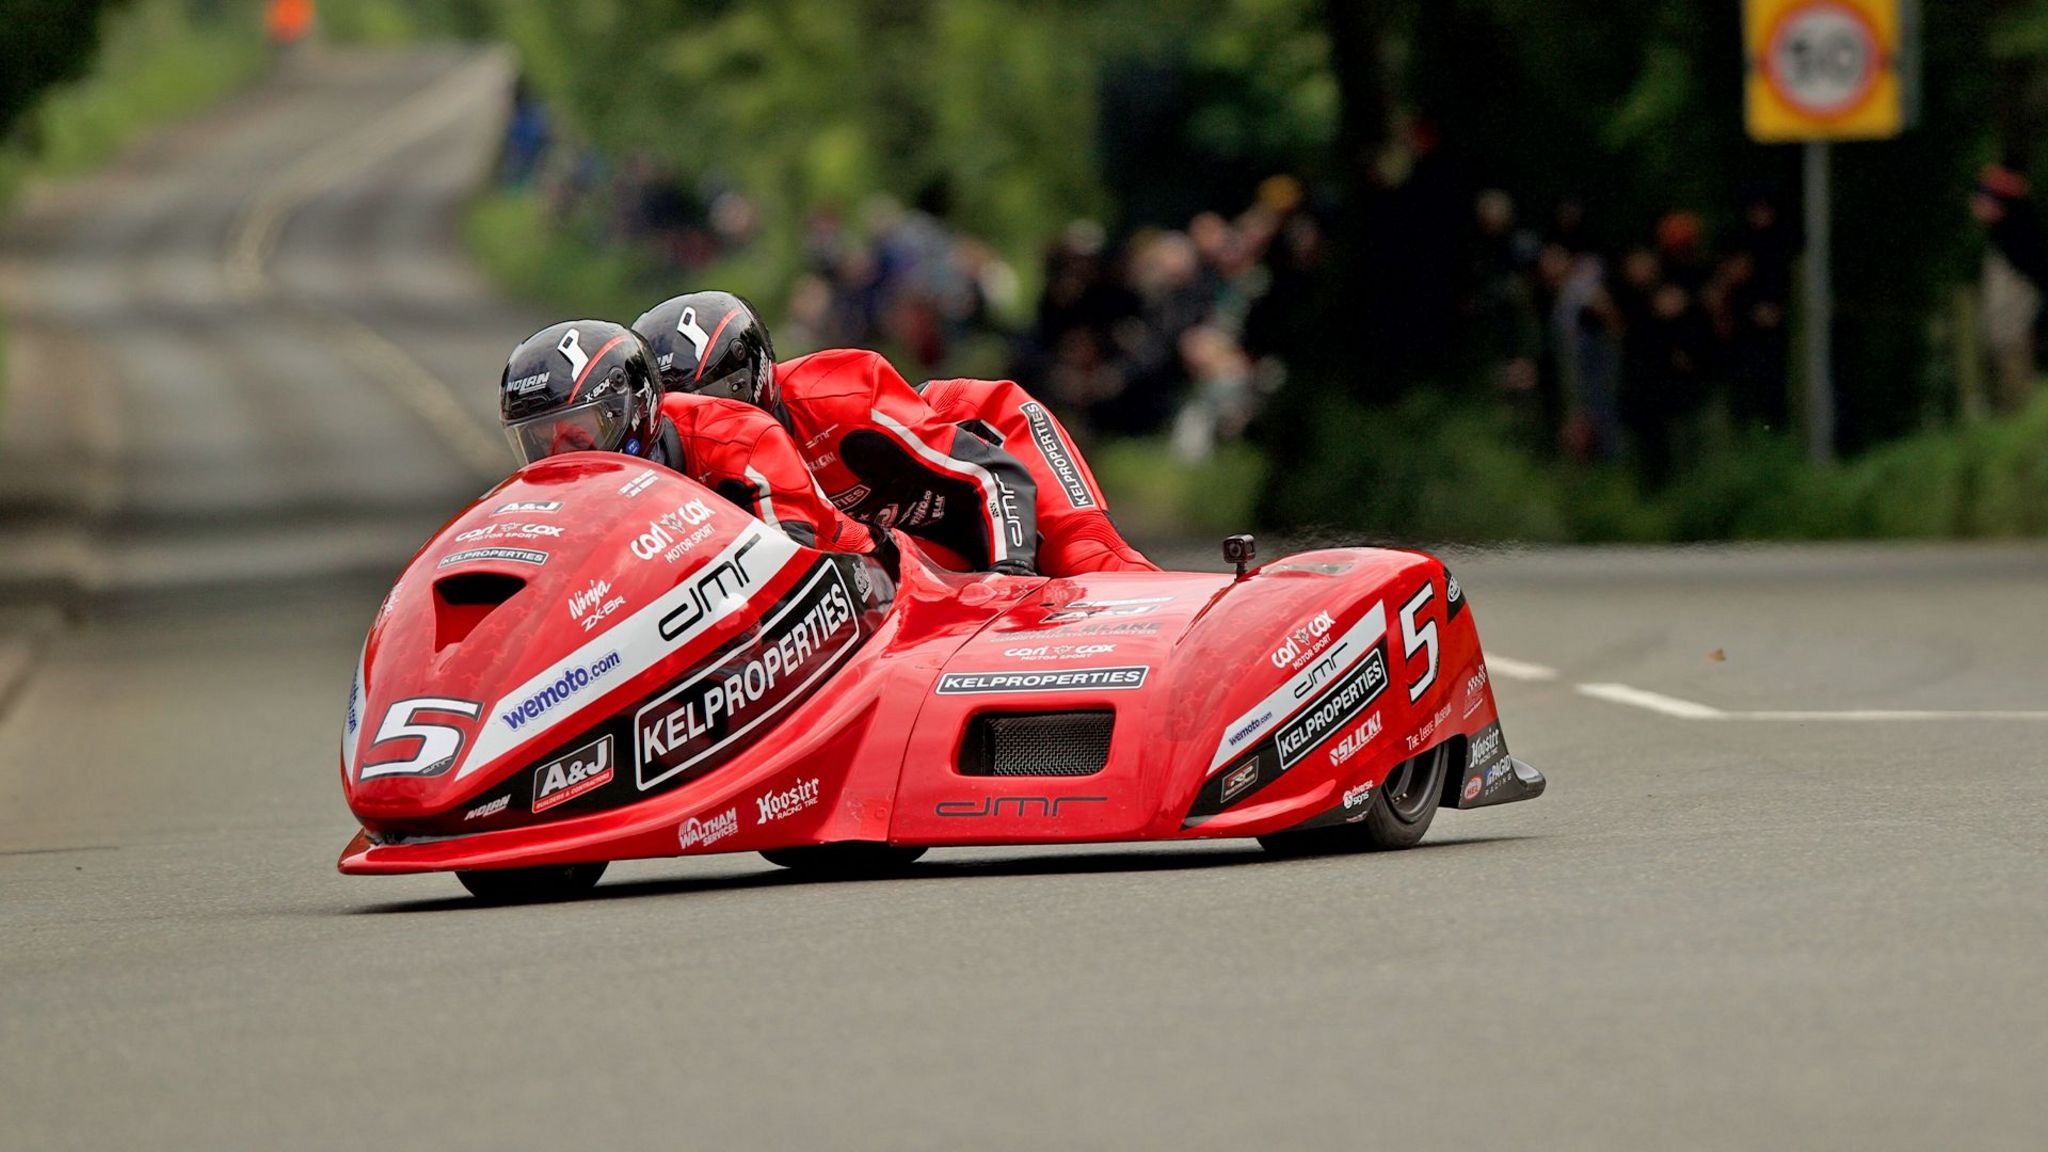 A bright red sidecar outfit on race track with crowds and greenery in the background